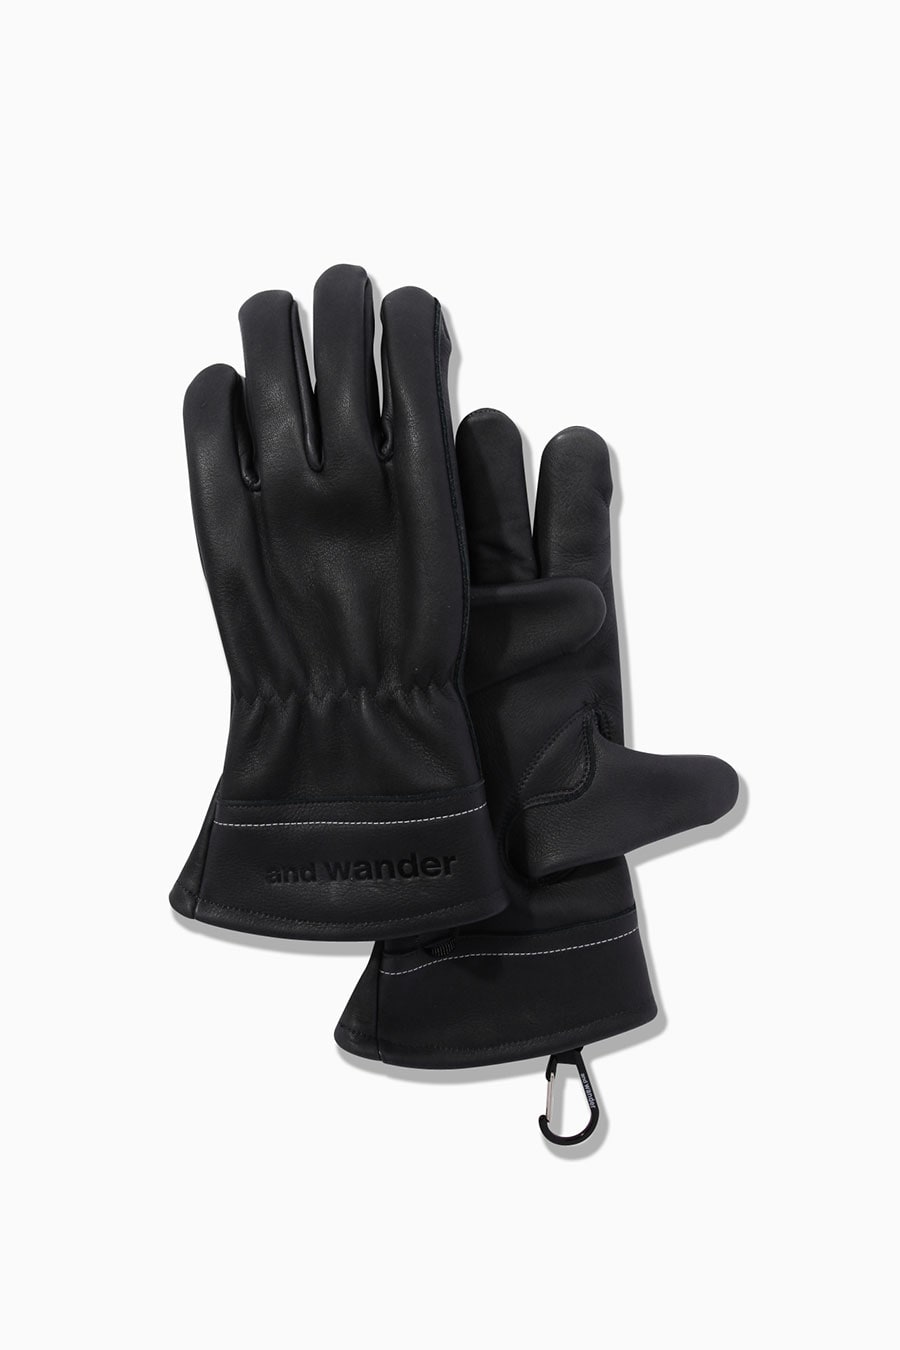 GRIP SWANY × and wander TAKIBI glove(Color：charcoal)／16,500円 ※4月上旬入荷予定。